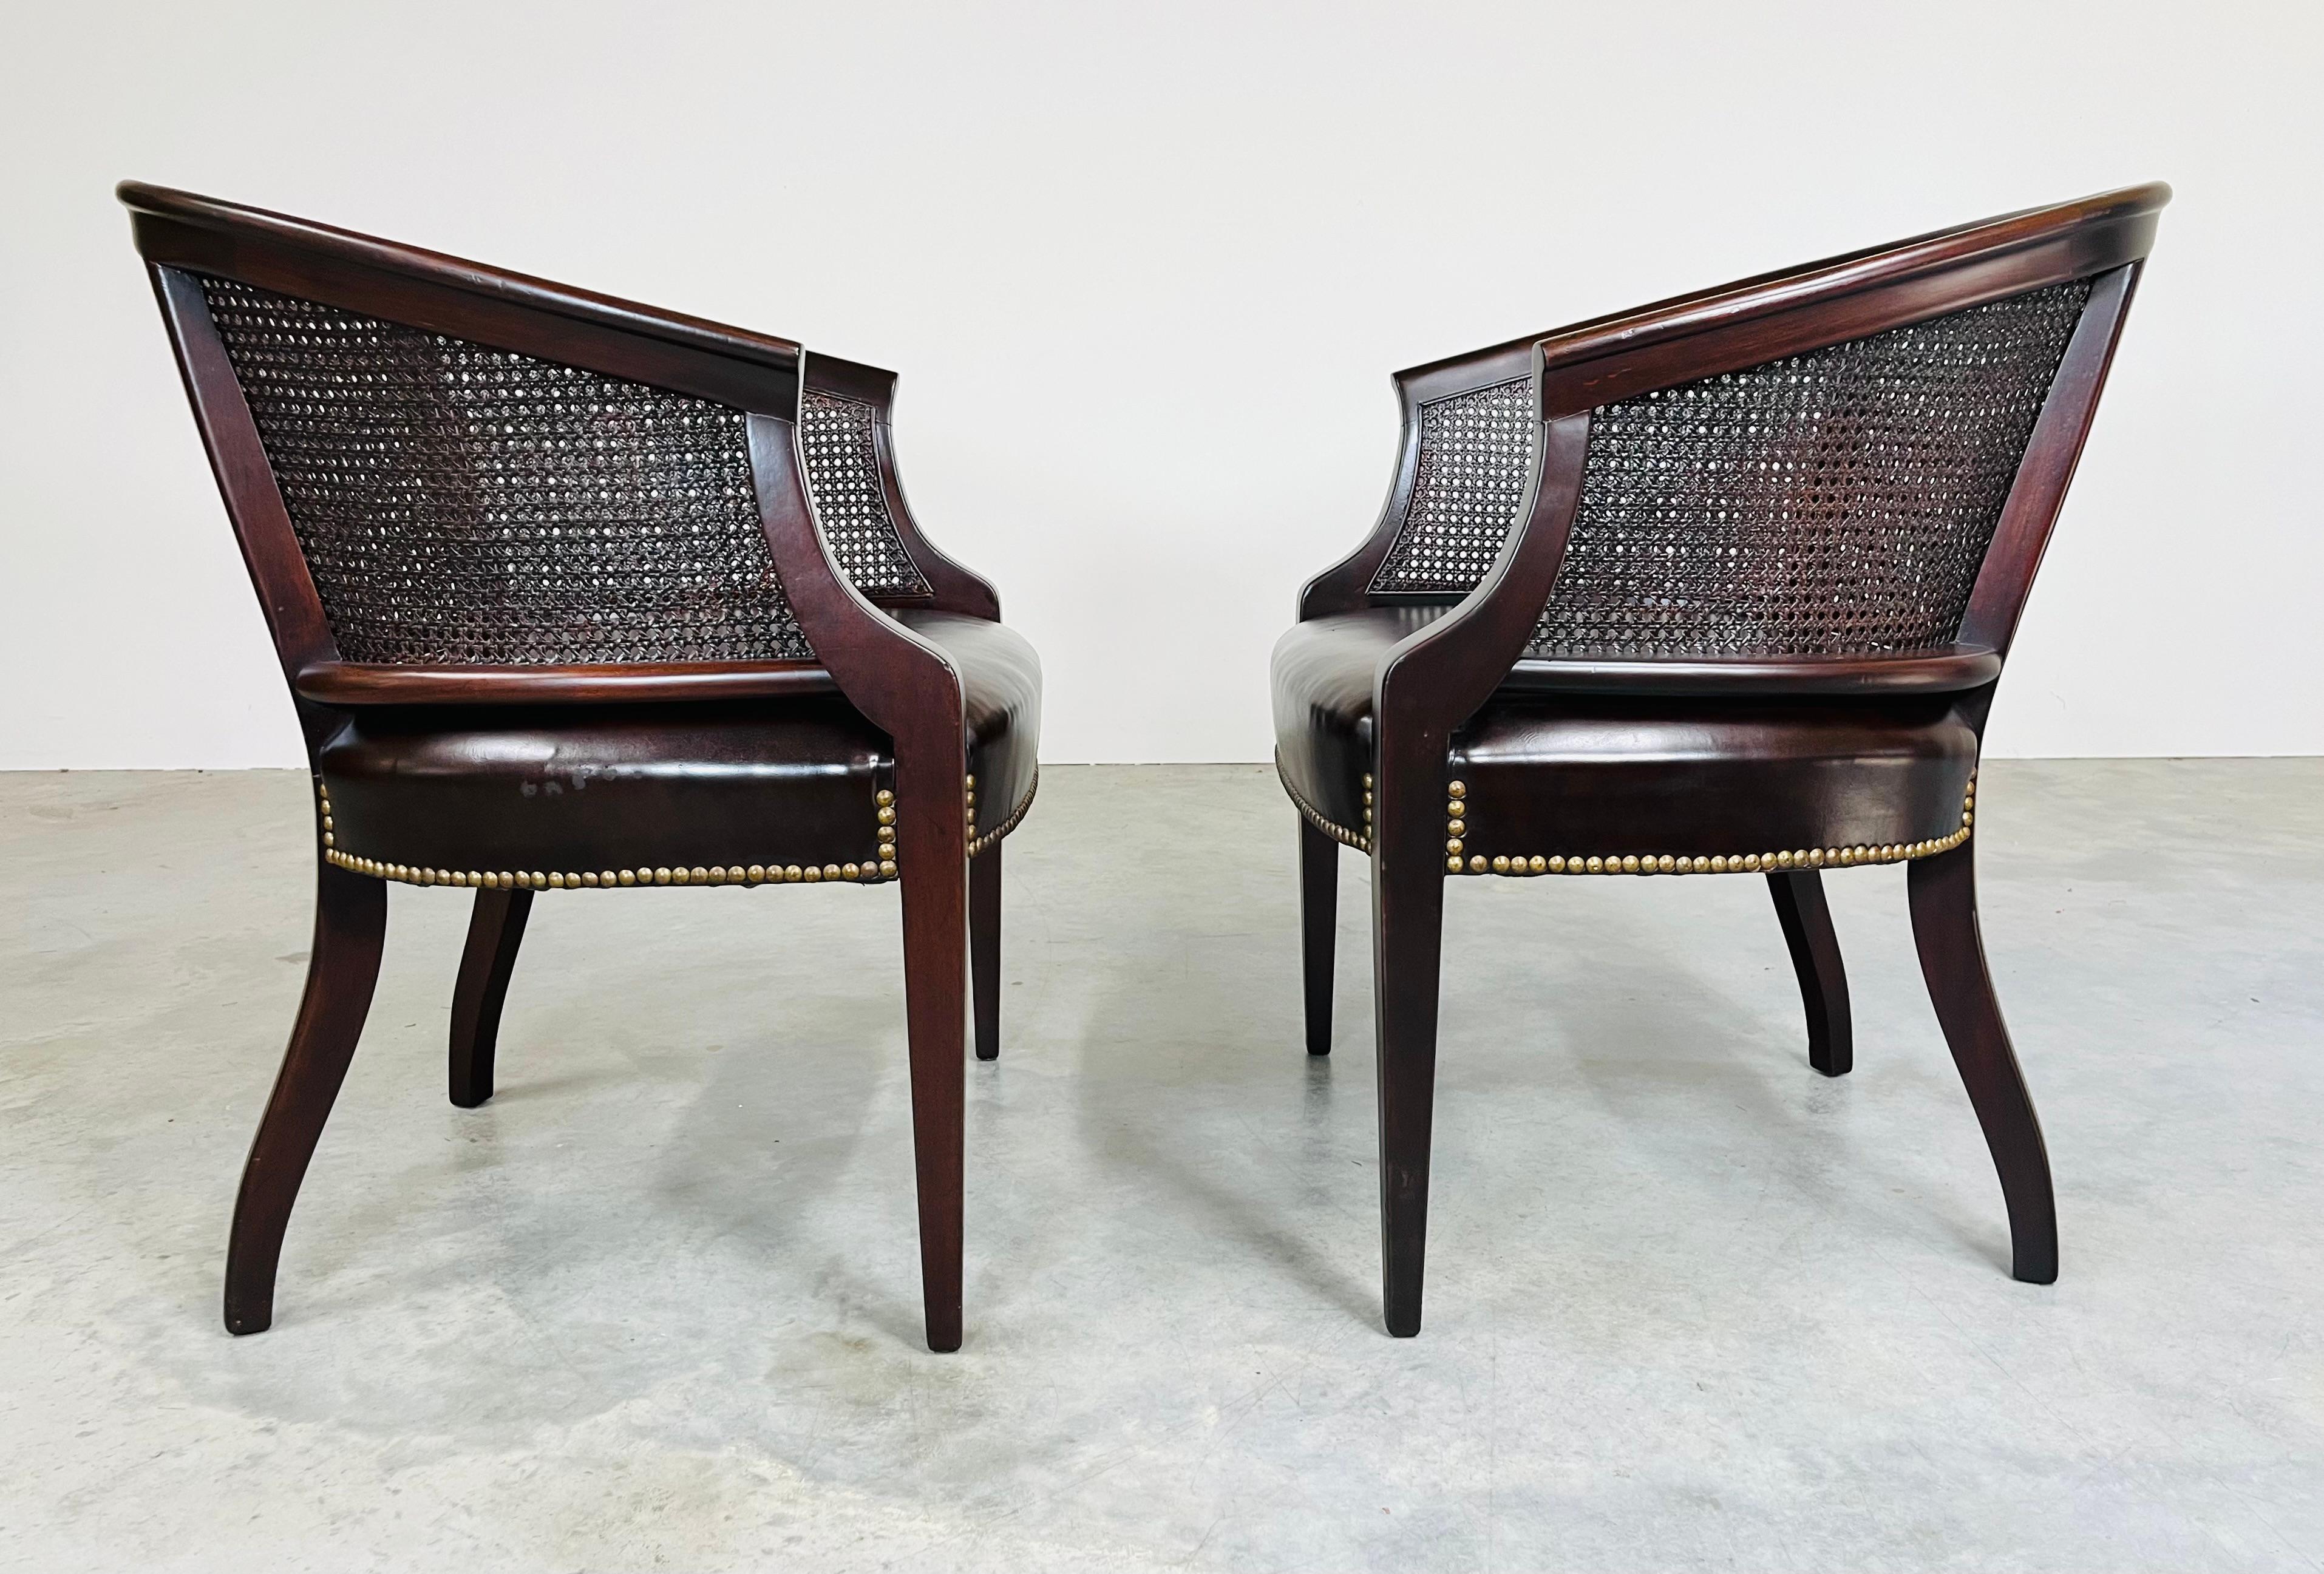 Pair of Regency Hickory Chair Co. Cane Barrel Back Club Chairs Having Lithe Legs In Excellent Condition For Sale In Southampton, NJ